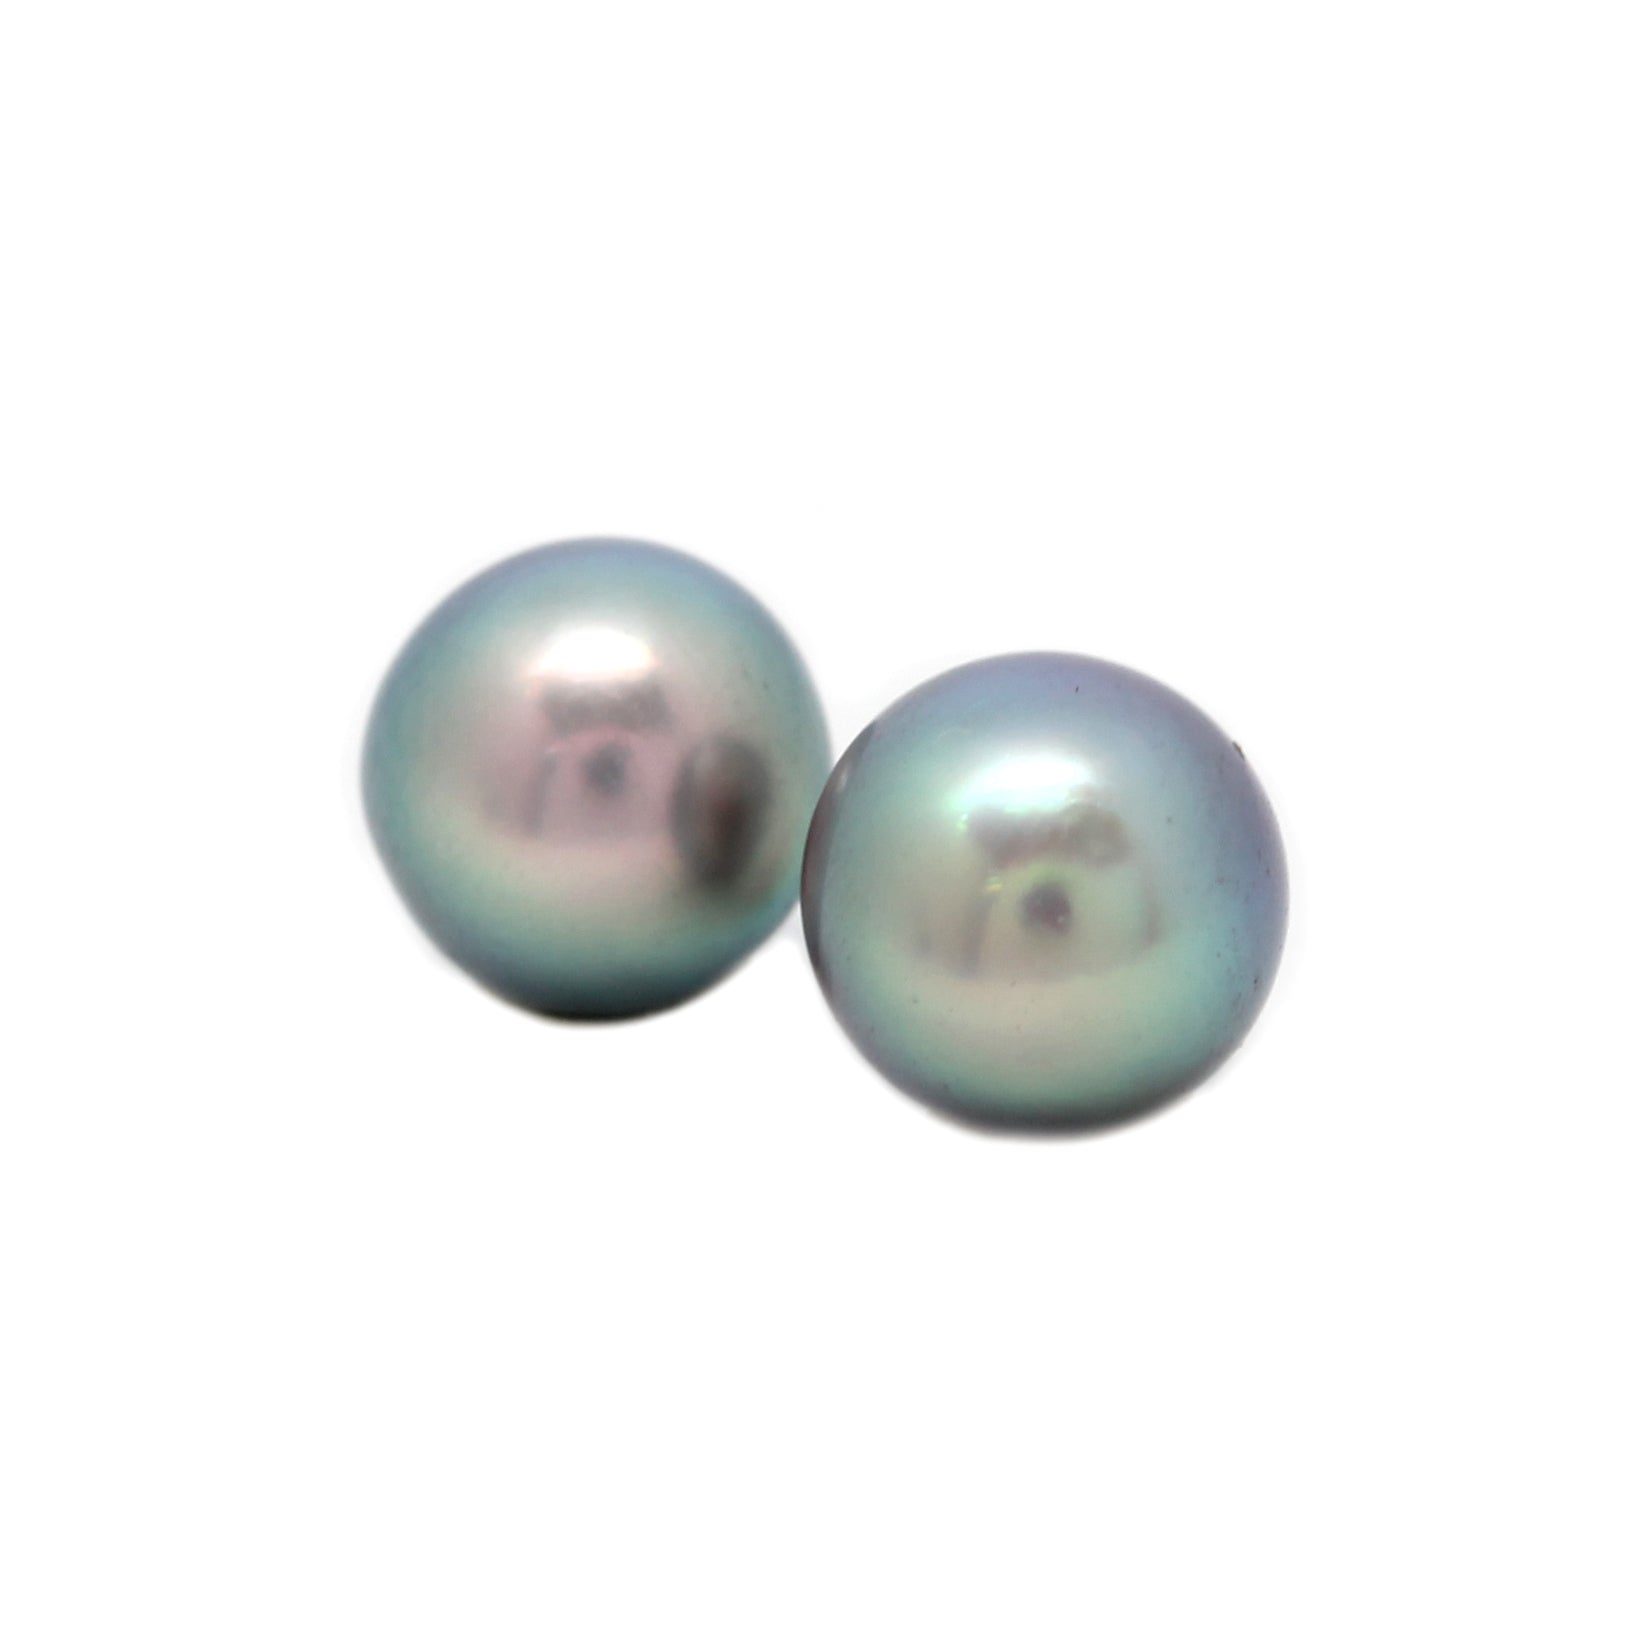 Pair of Loose Pearls from the Sea of Cortez